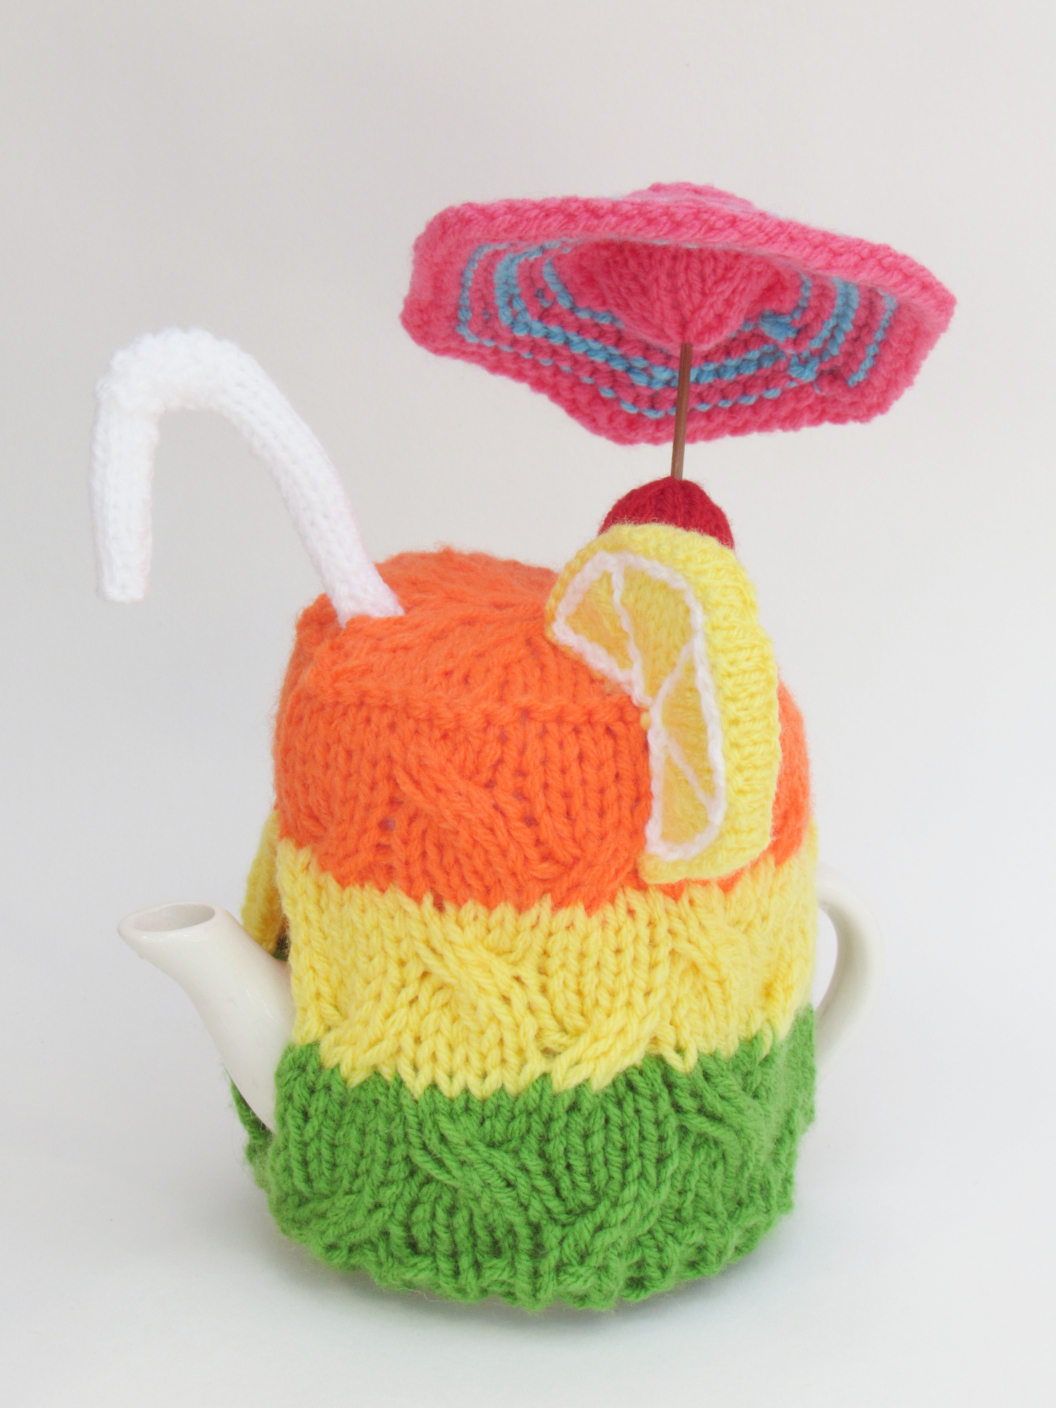 Cocktail Party knitting pattern